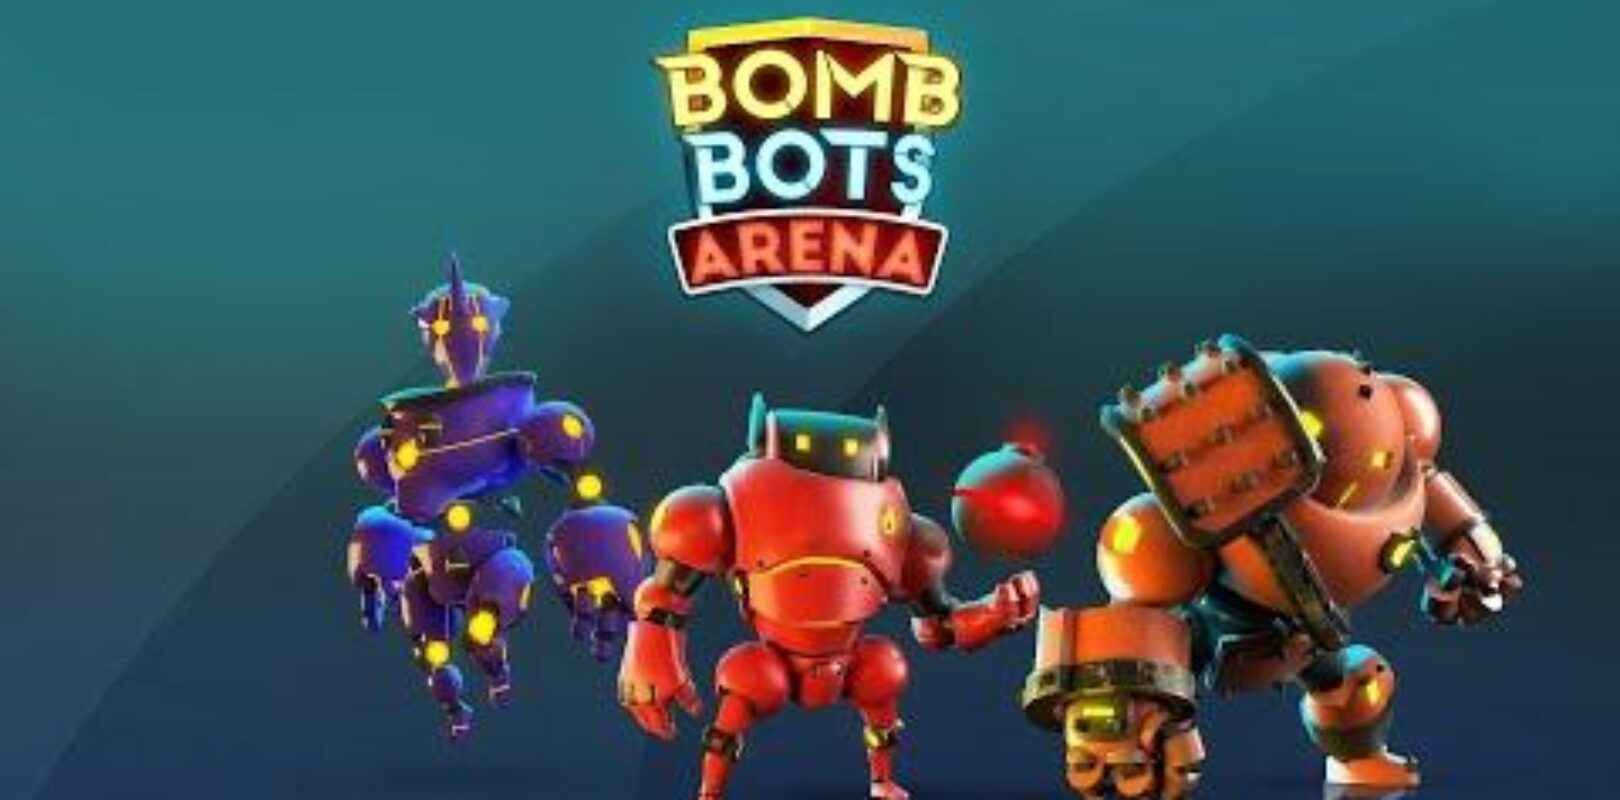 Bomb Bots Arena Exclusive Steelseries Game Pack Giveaway Pivotal Gamers - roblox bots for games steam